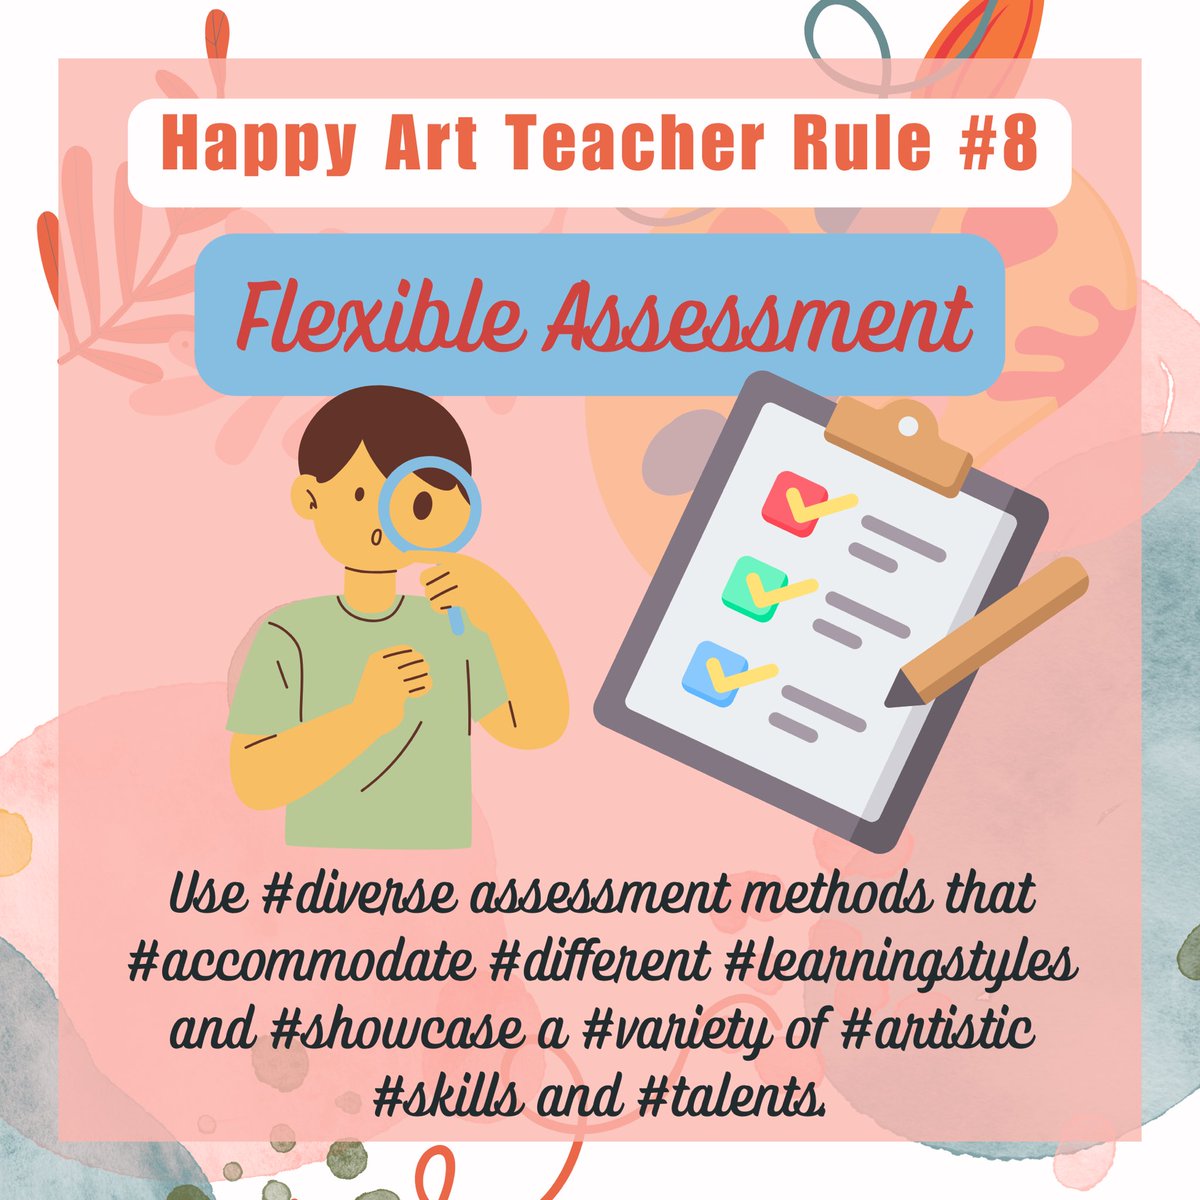 #Happy #Art #Teacher Rule #8. #Flexible #Assessment: Use #diverse assessment methods that #accommodate #different #learningstyles and #showcase a #variety of #artistic #skills and #talents. @tonihenneman @edutopia @canva @SchoolArts @creativitydept